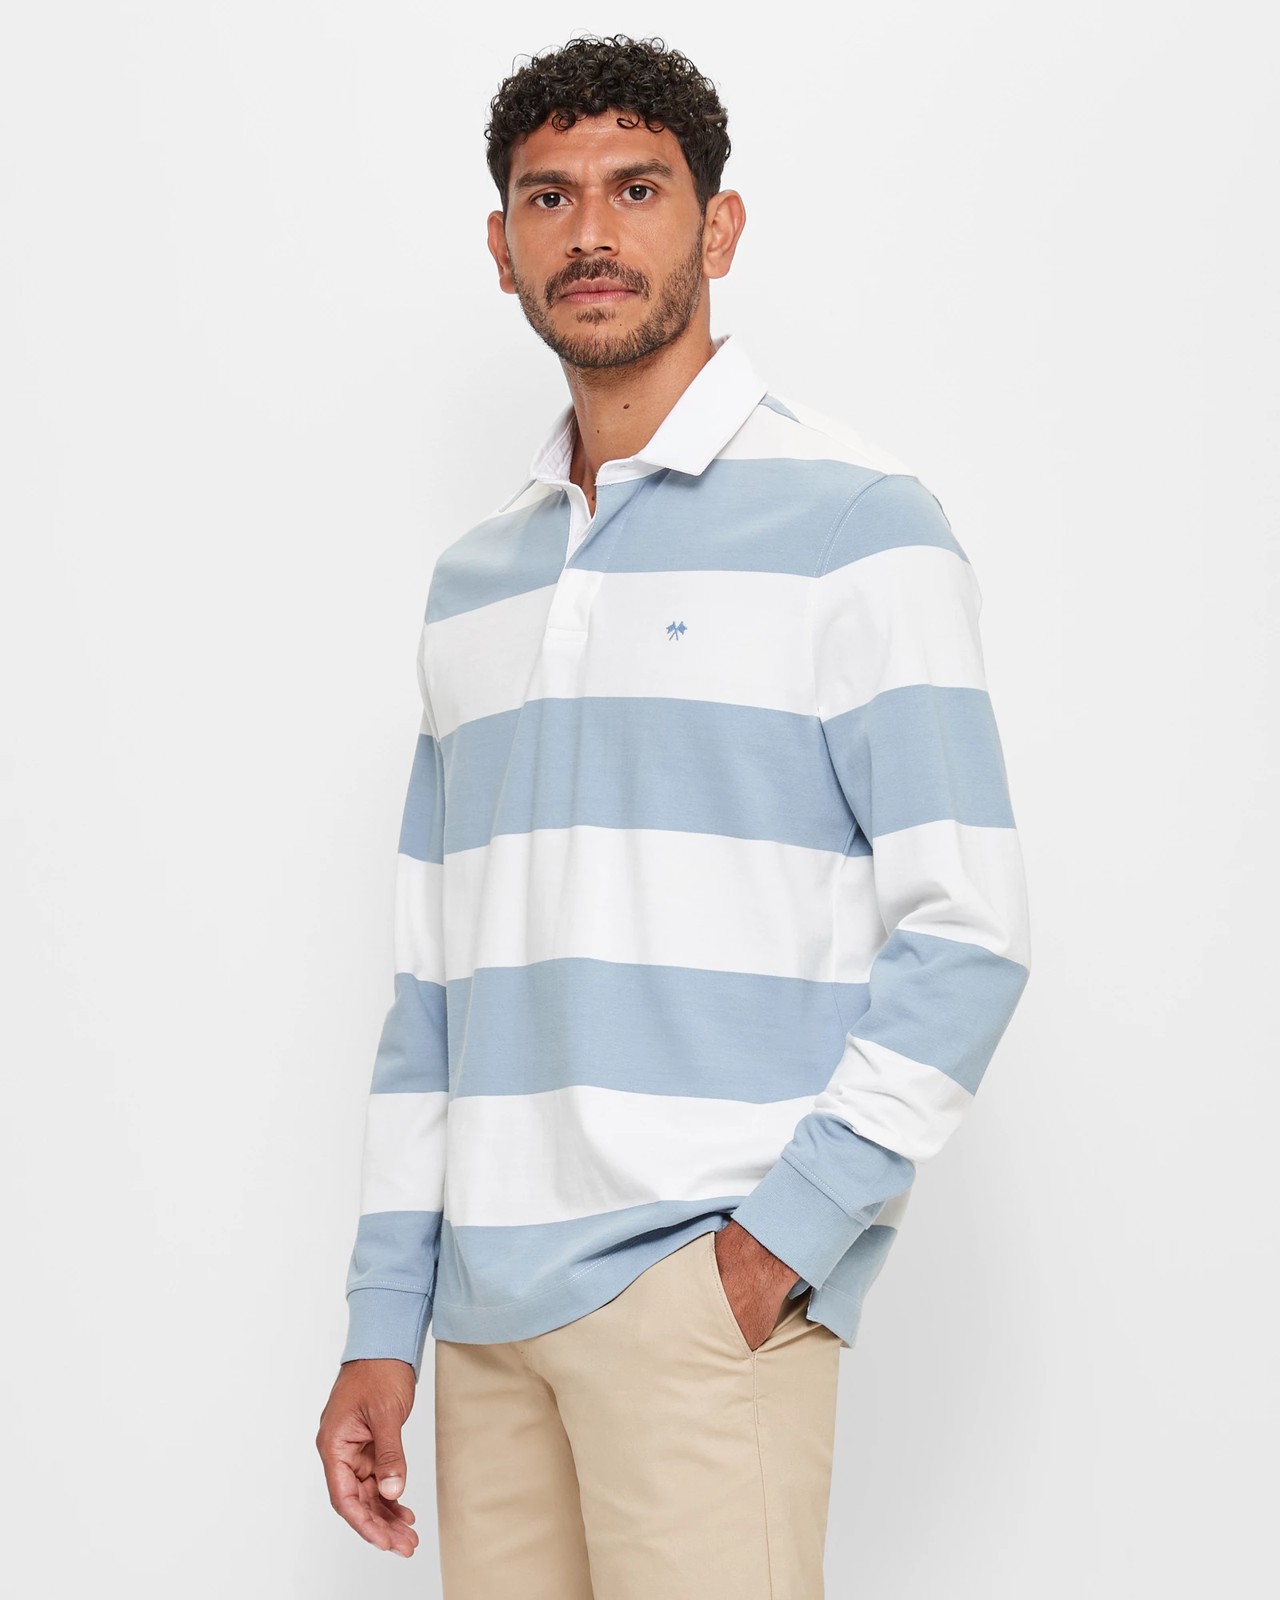 Rugby Striped Polo Shirt | Target Australia